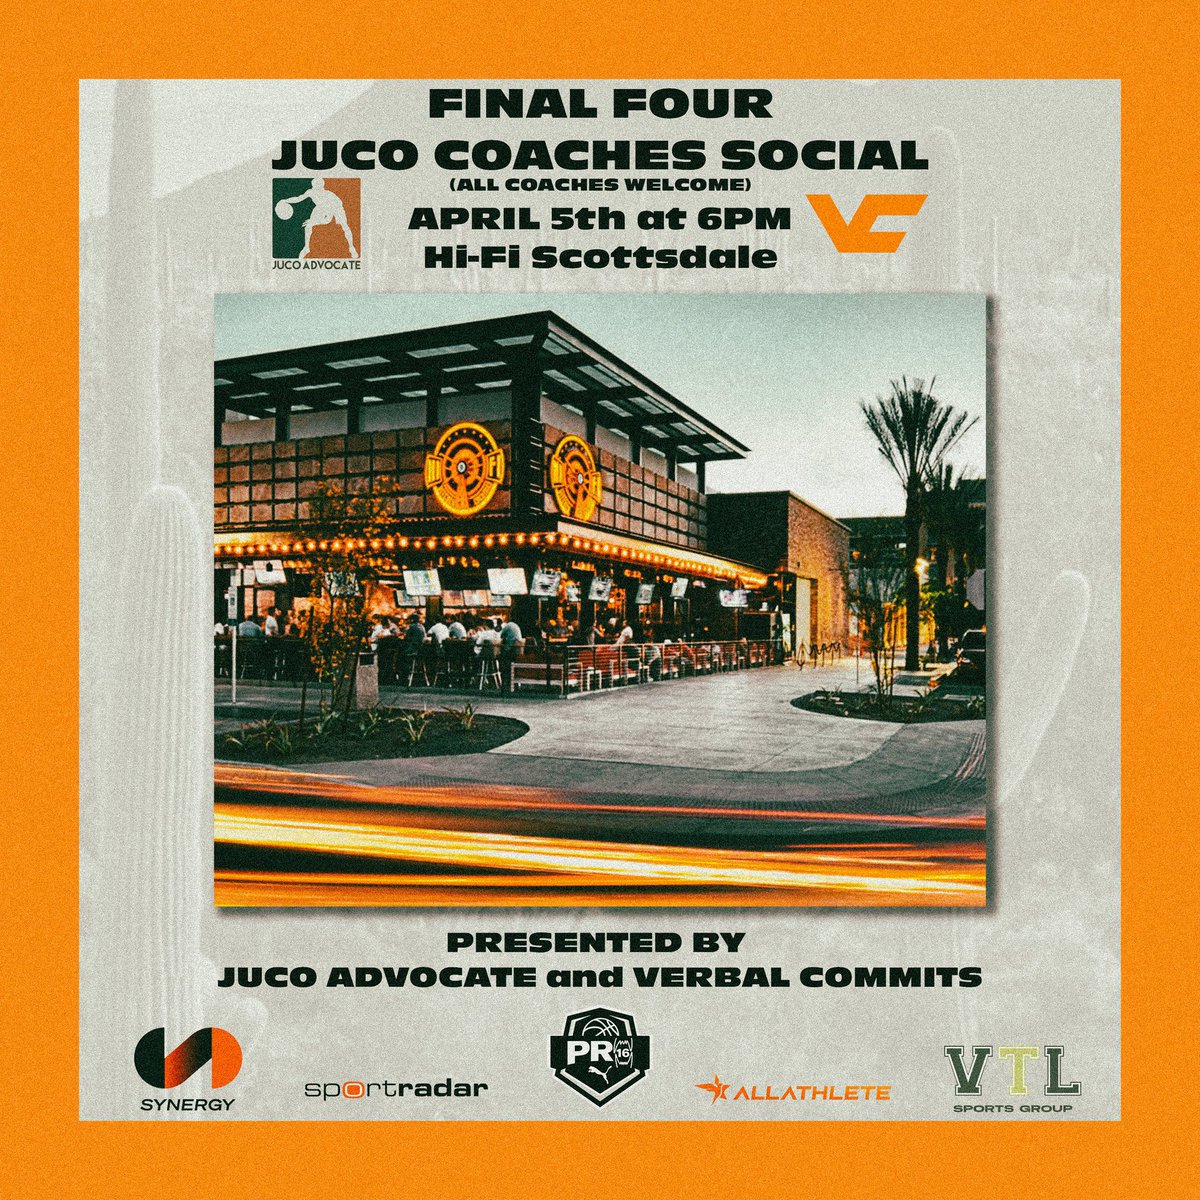 THE JUCO COACHES SOCIAL IS BACK BABY!!! April 5th at 6PM Hifi Kitchen and Cocktails 4420 N Saddlebag Trail, Scottsdale, AZ ALL COACHES OF ALL LEVELS WELCOME!!! Shoutout to our sponsors @SynergySST @Sportradar @PRO16League @AllAthleteInc @vtlsports